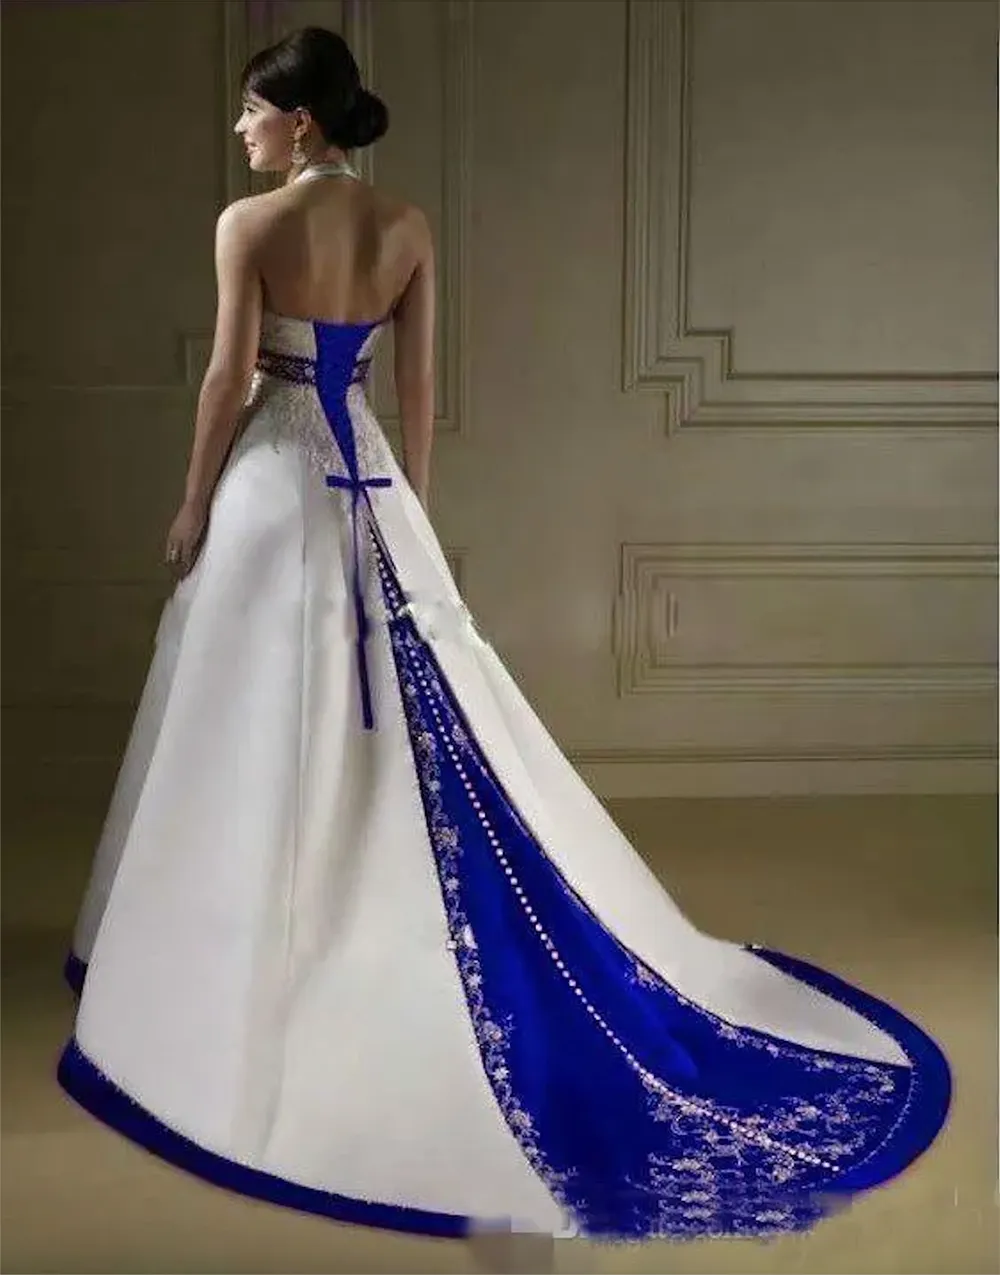 Vintage White And Royal Blue Satin Wedding Dress Strapless Embroidery Chapel Train Corset Custom Made Bridal Dresses Wedding Gowns